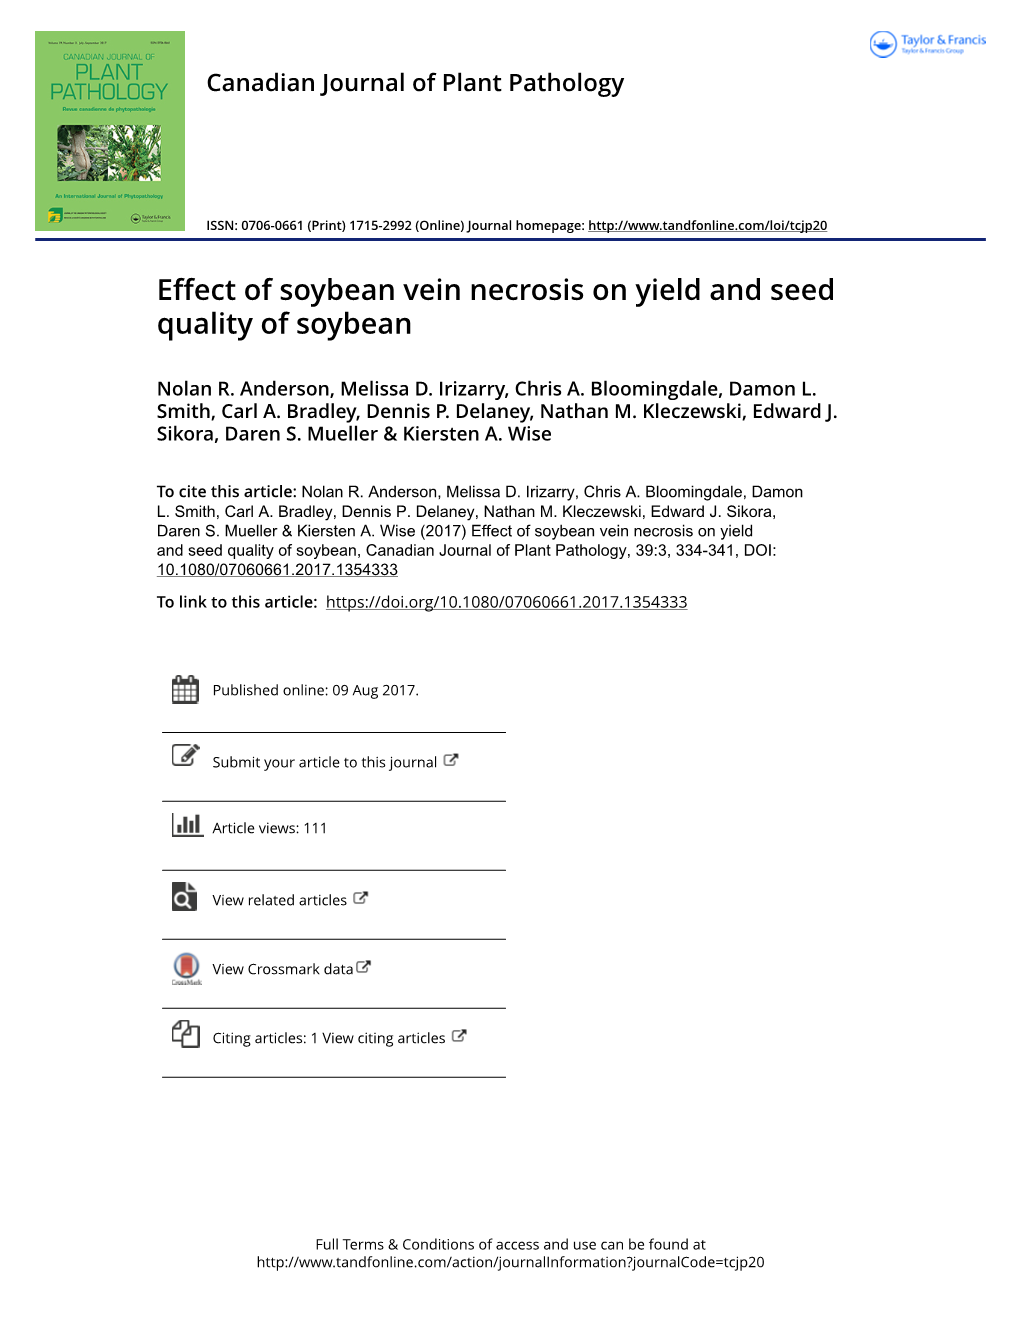 Effect of Soybean Vein Necrosis on Yield and Seed Quality of Soybean